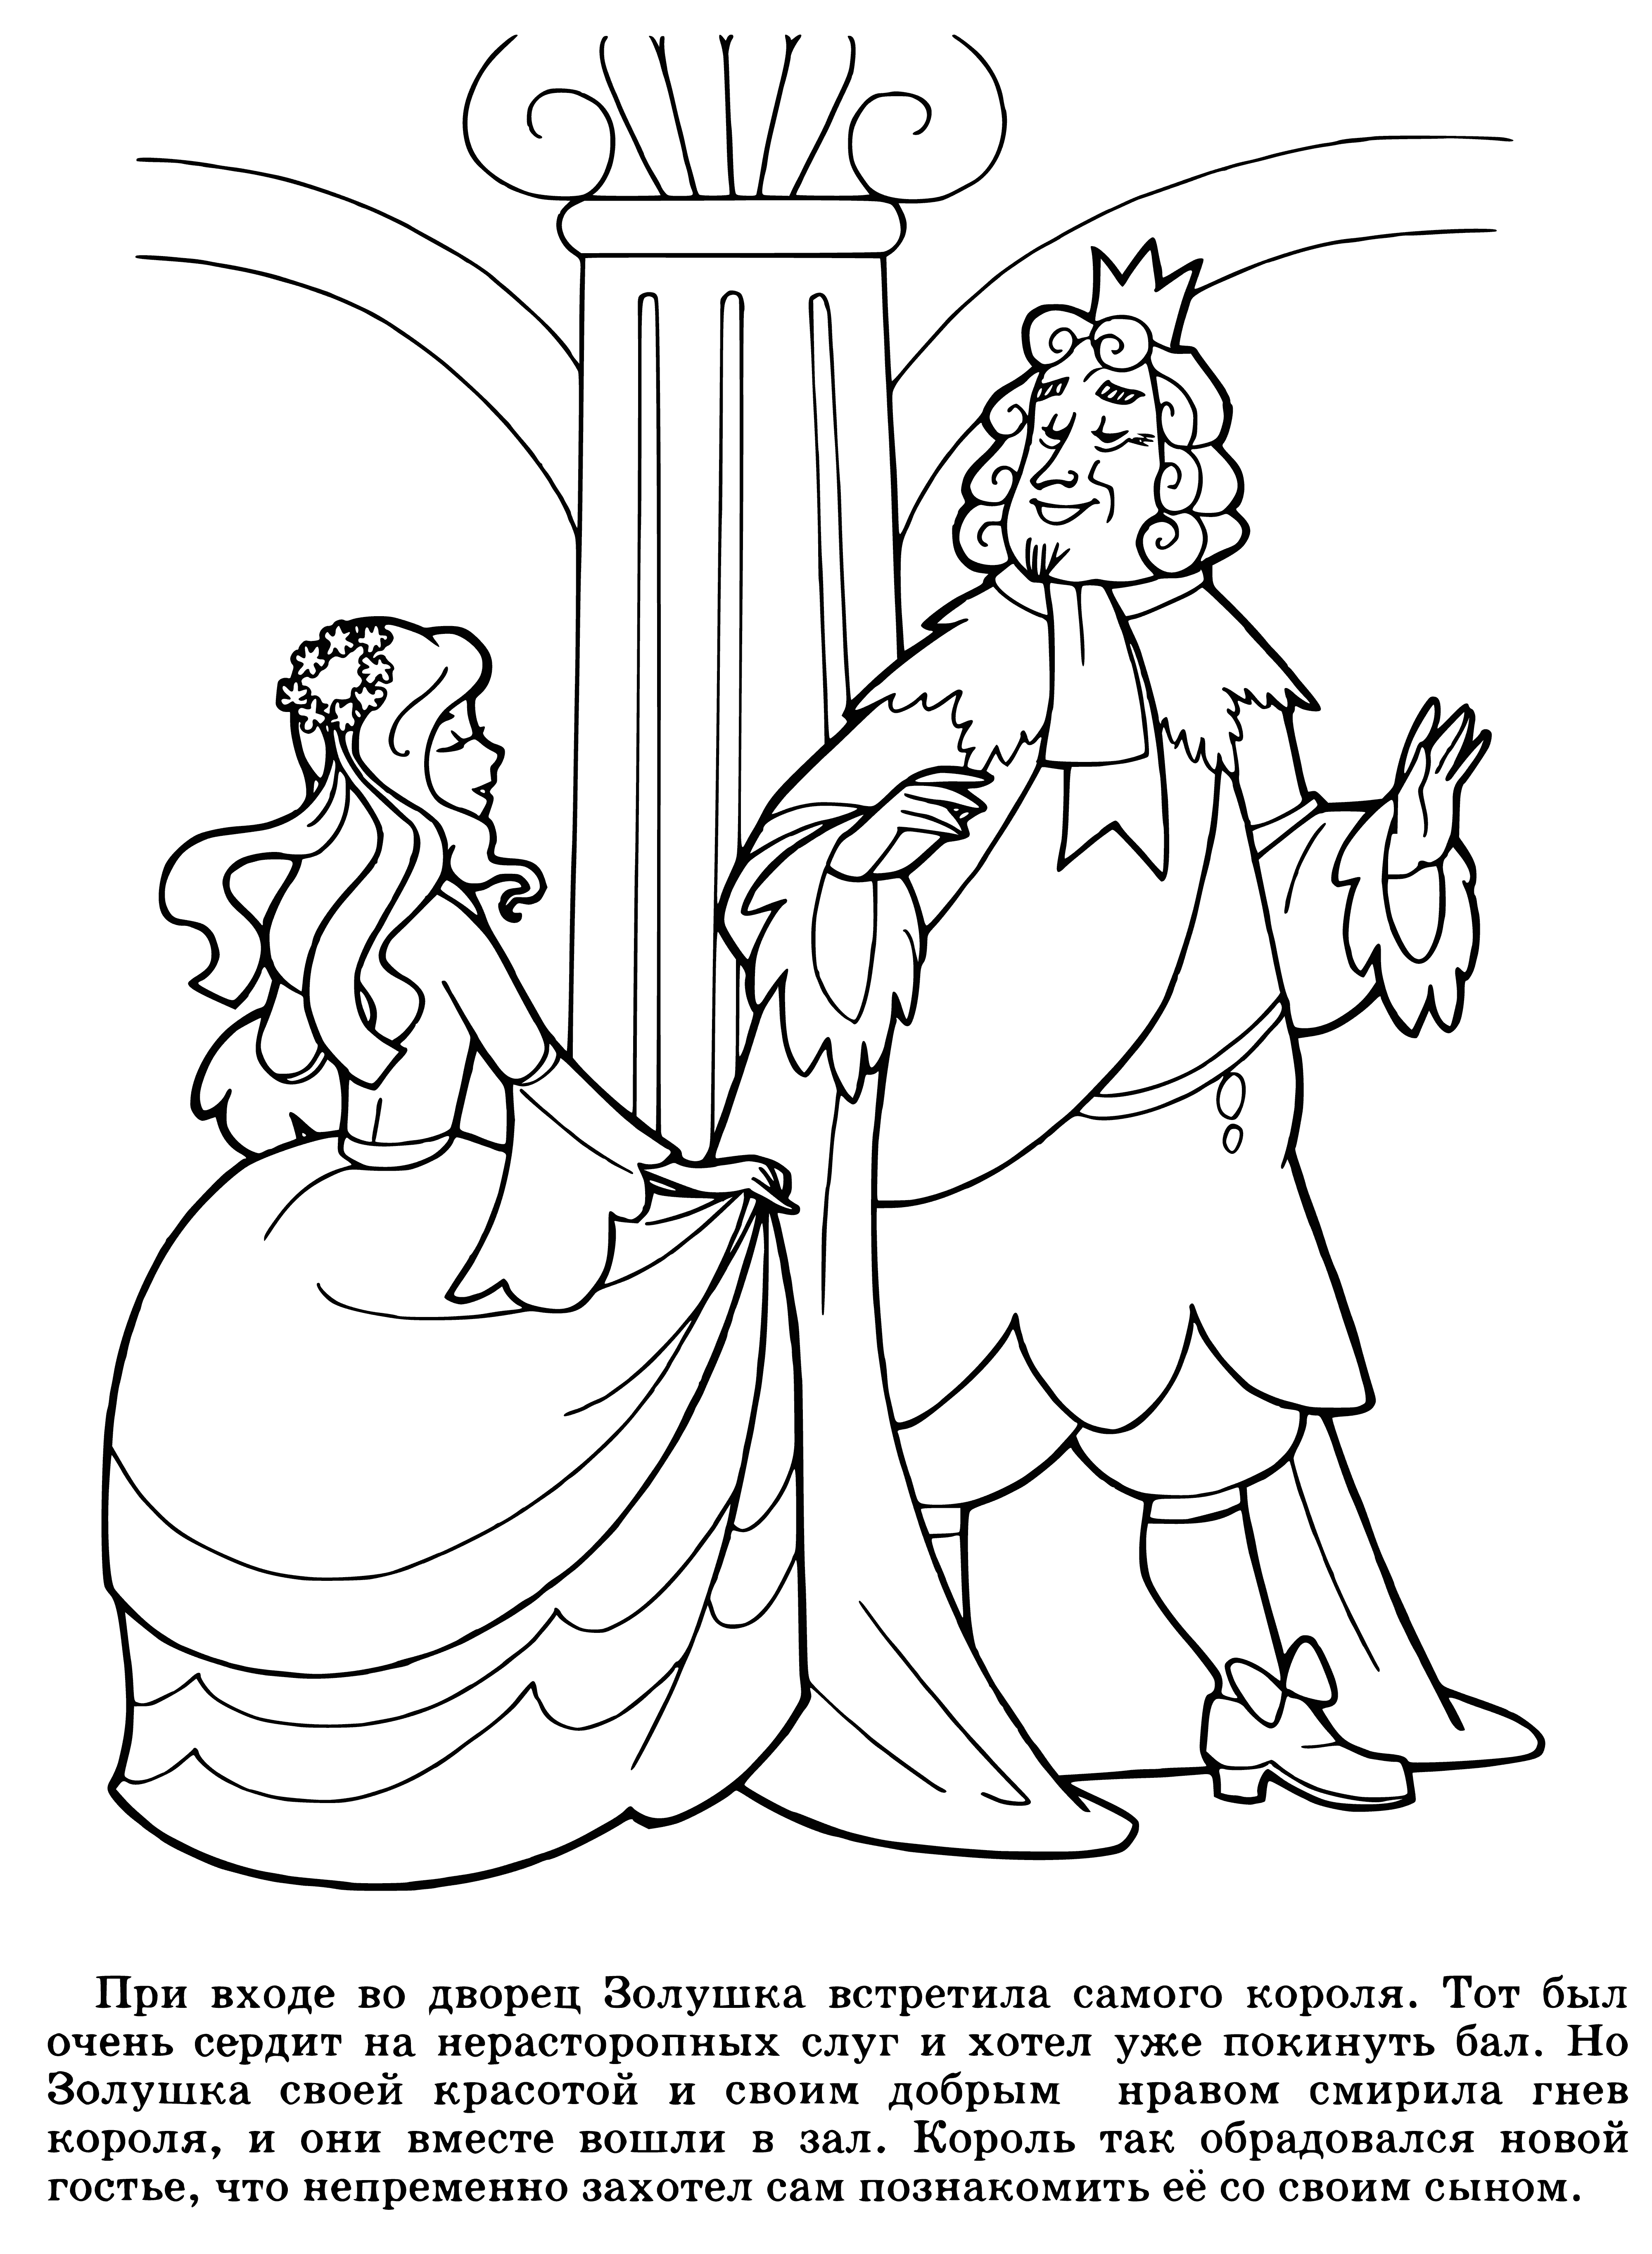 coloring page: Crowd gathered in town square to hear a storyteller captivate the King with a riveting tale.